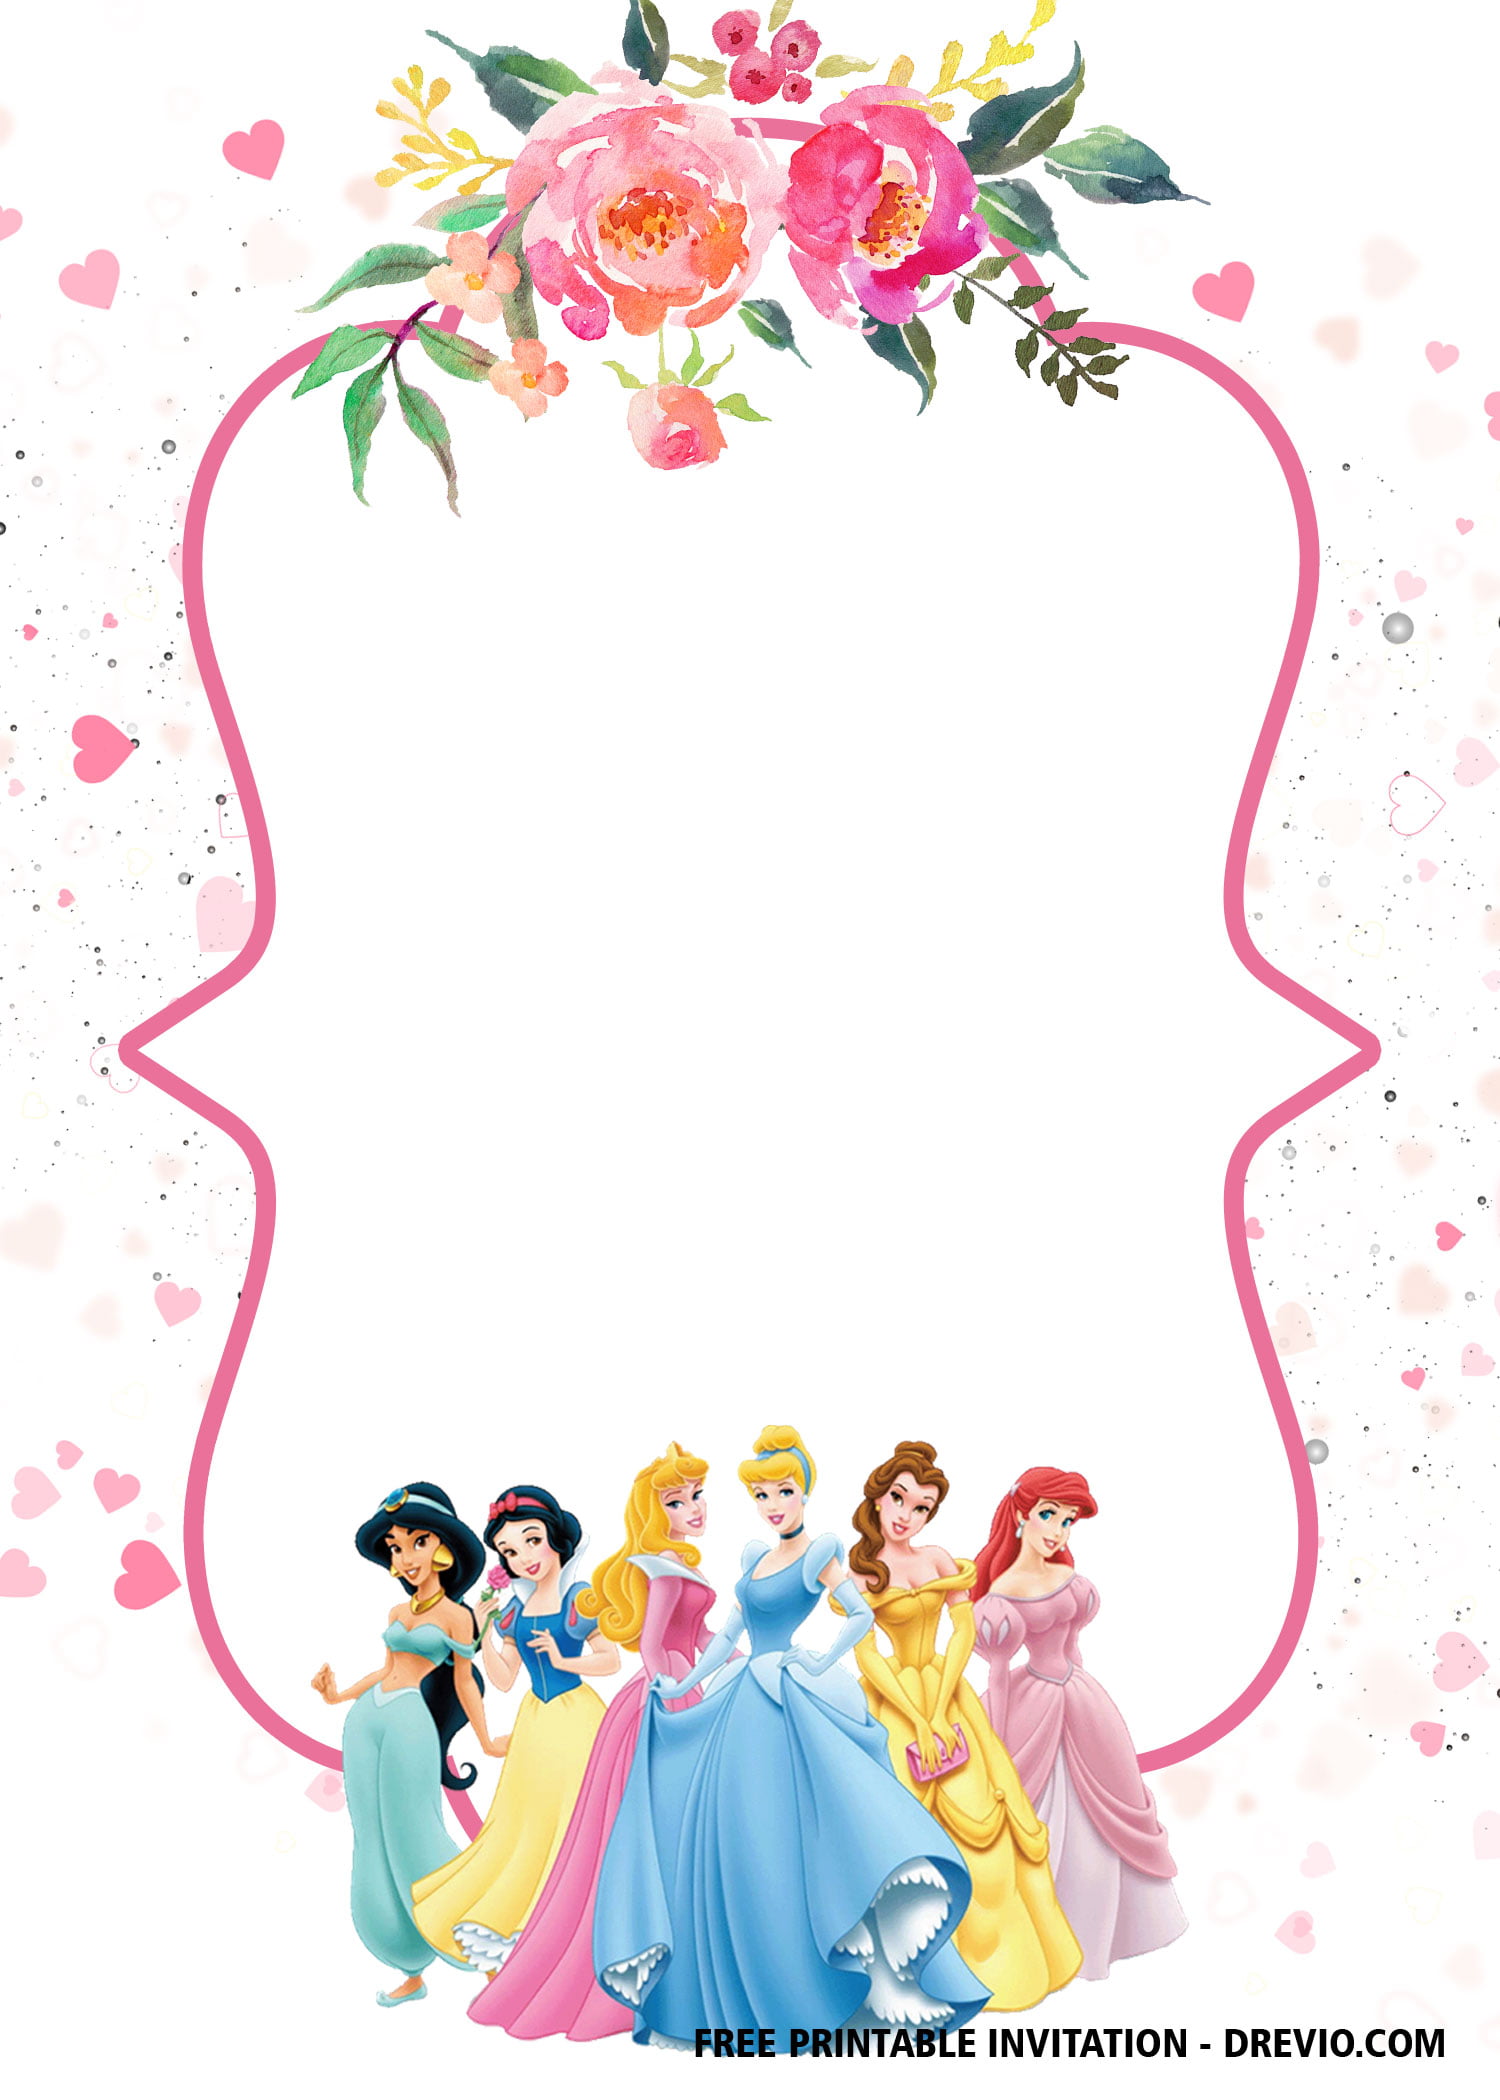 FREE Disney Princess Invitation Template for Your Little ...